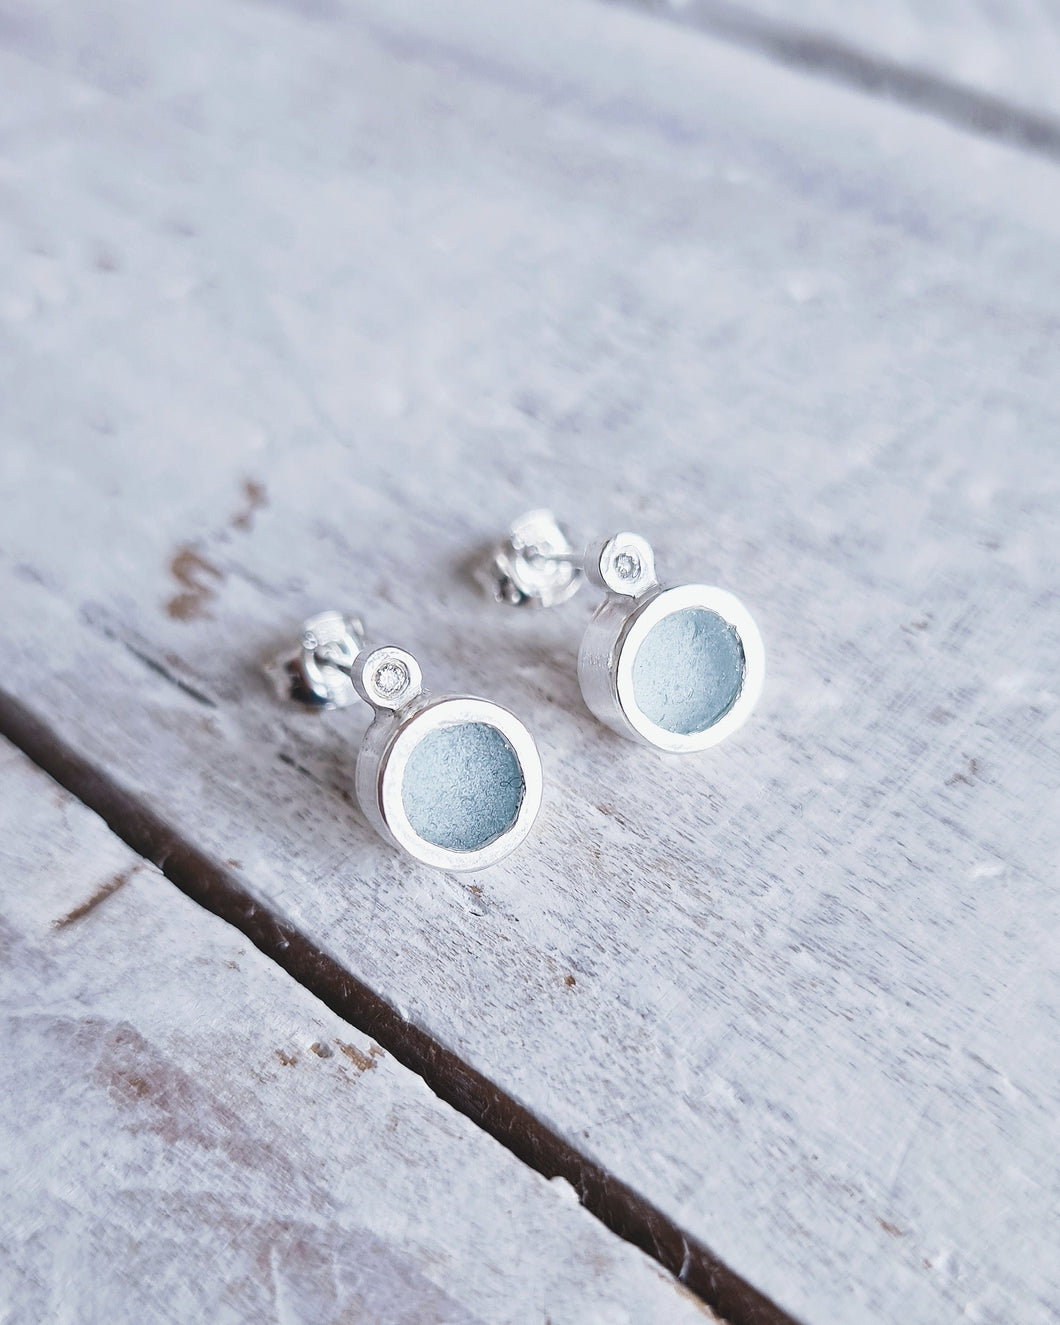 BESPOKE - Sea Glass Bezel Stud Earrings (No Diamond Option Also Available) in Sterling Silver or 9ct Gold